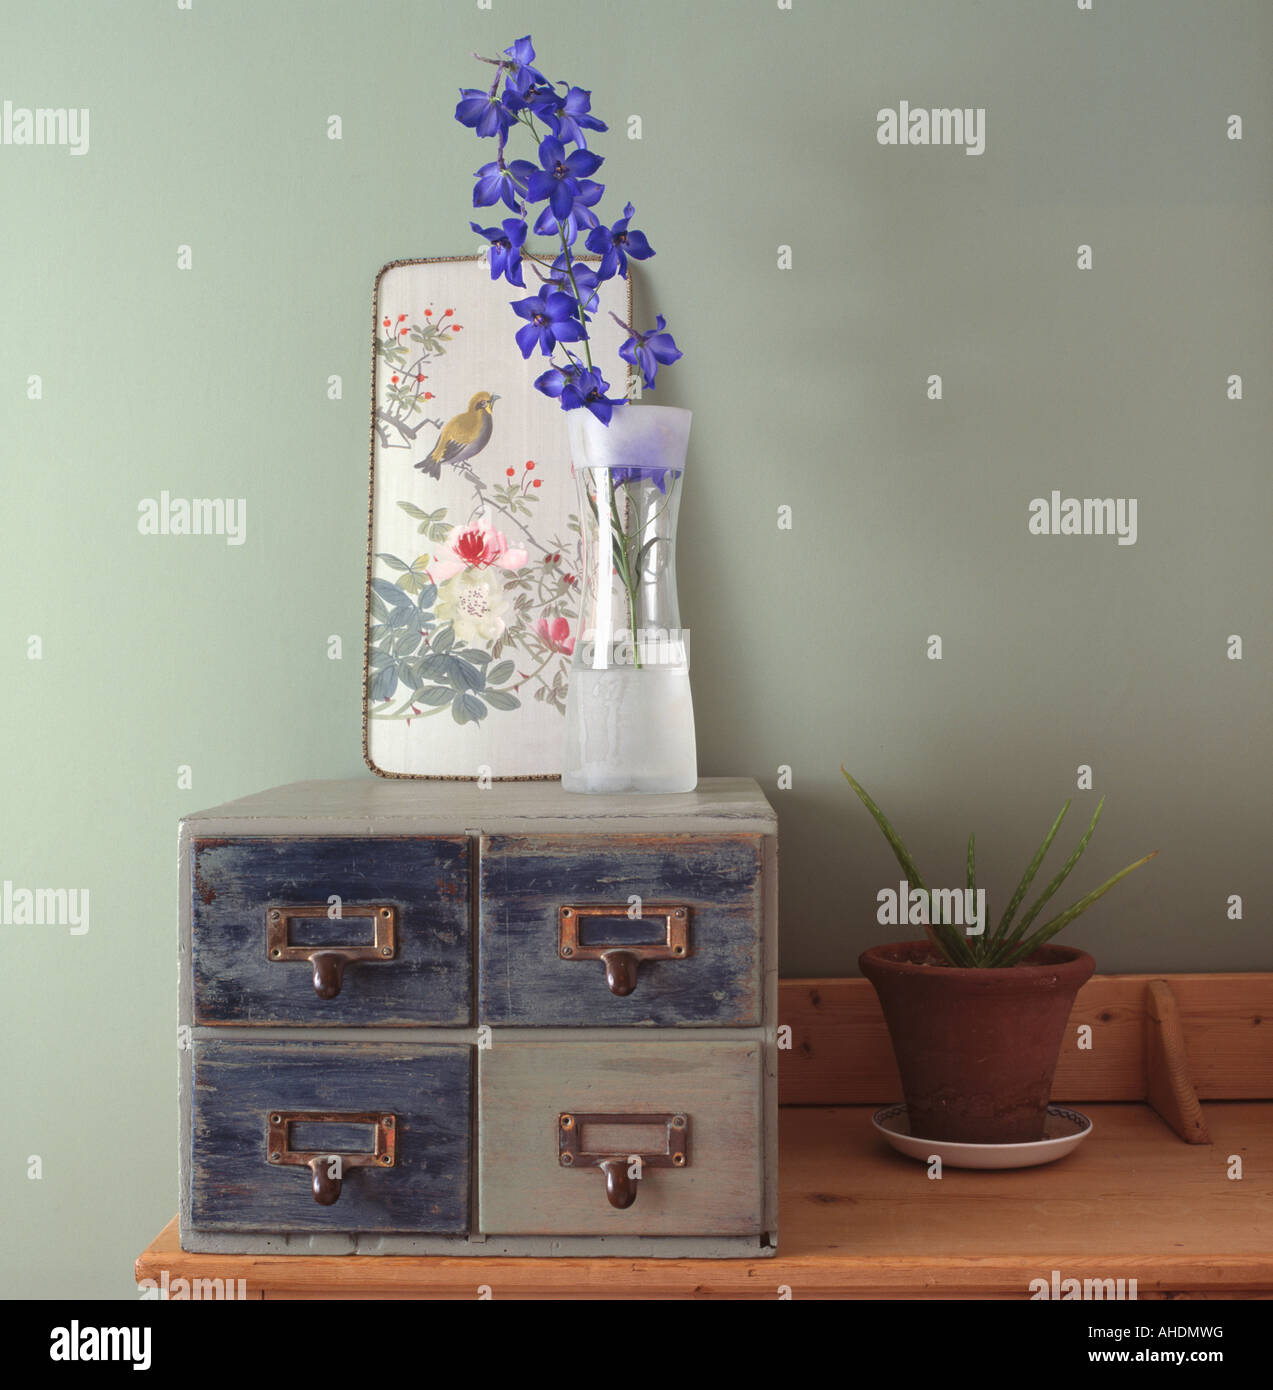 Close up of small Chinese picture and single blue delphinium flower in glass vase on set of small filing drawers Stock Photo